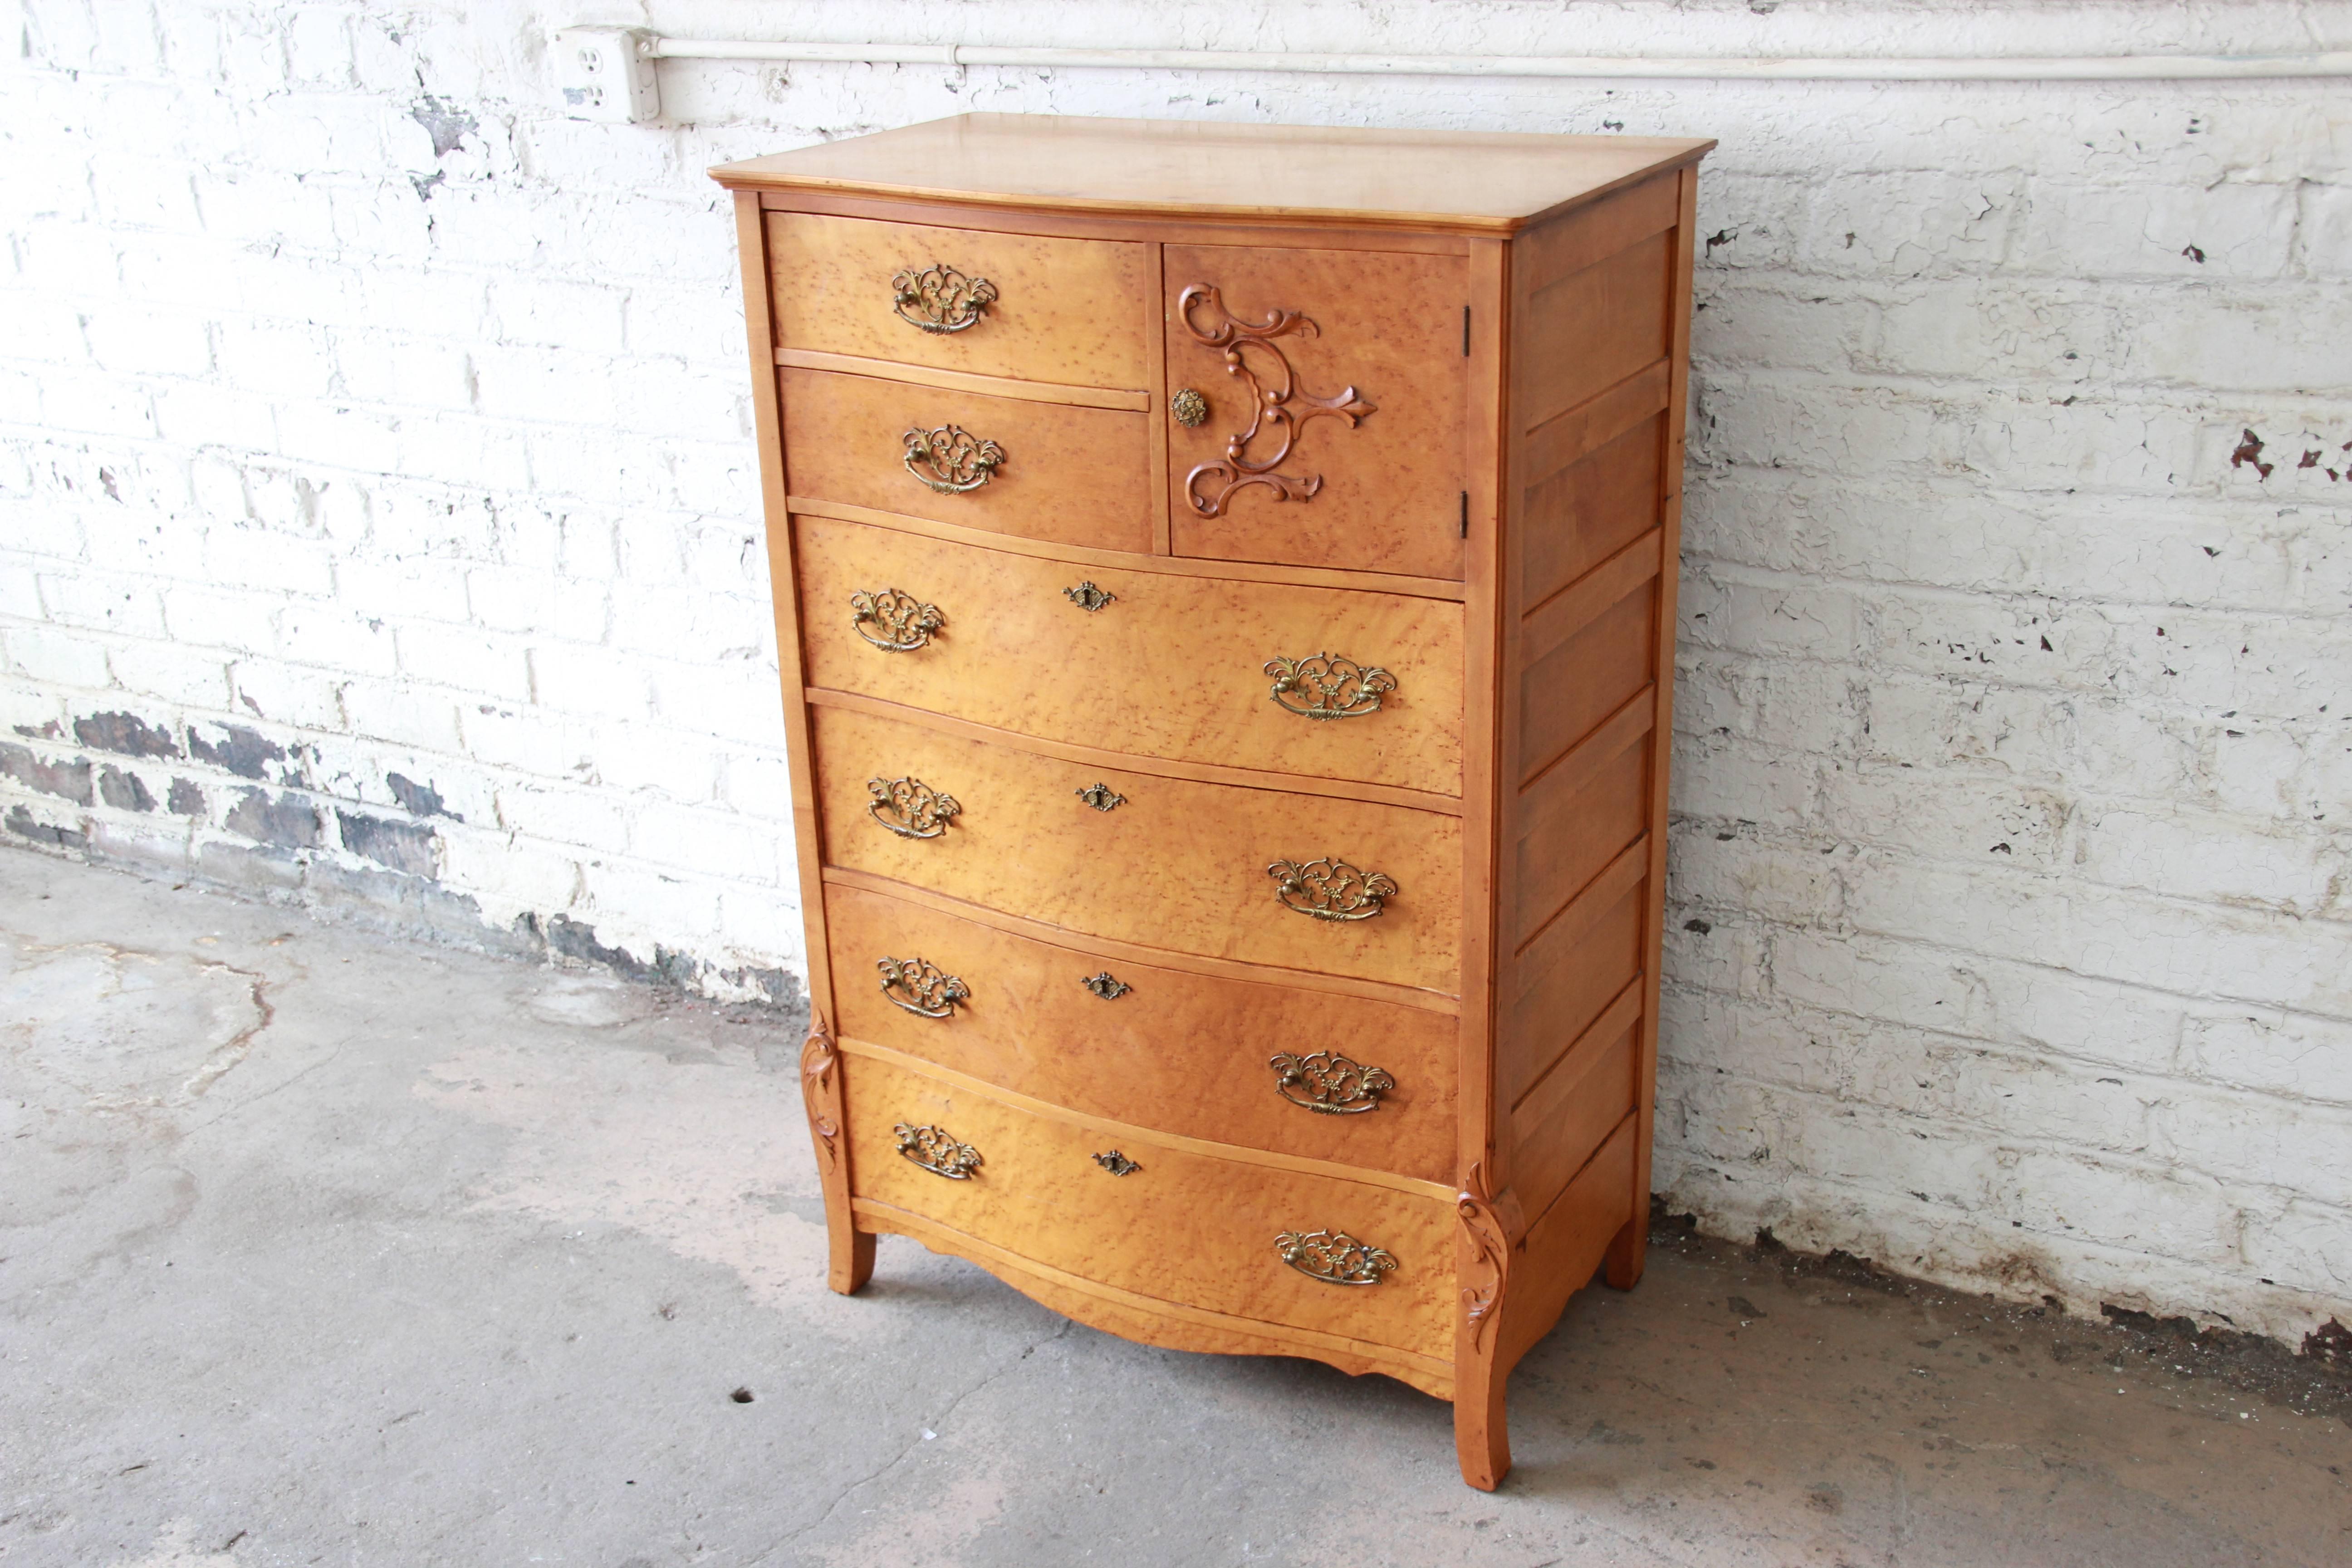 A gorgeous antique bird's-eye maple highboy dresser by Widdicomb Furniture Co. of grand rapids. The dresser features beautiful bird's-eye maple wood grain and original brass hardware. It offers ample room for storage, with six dovetailed drawers and